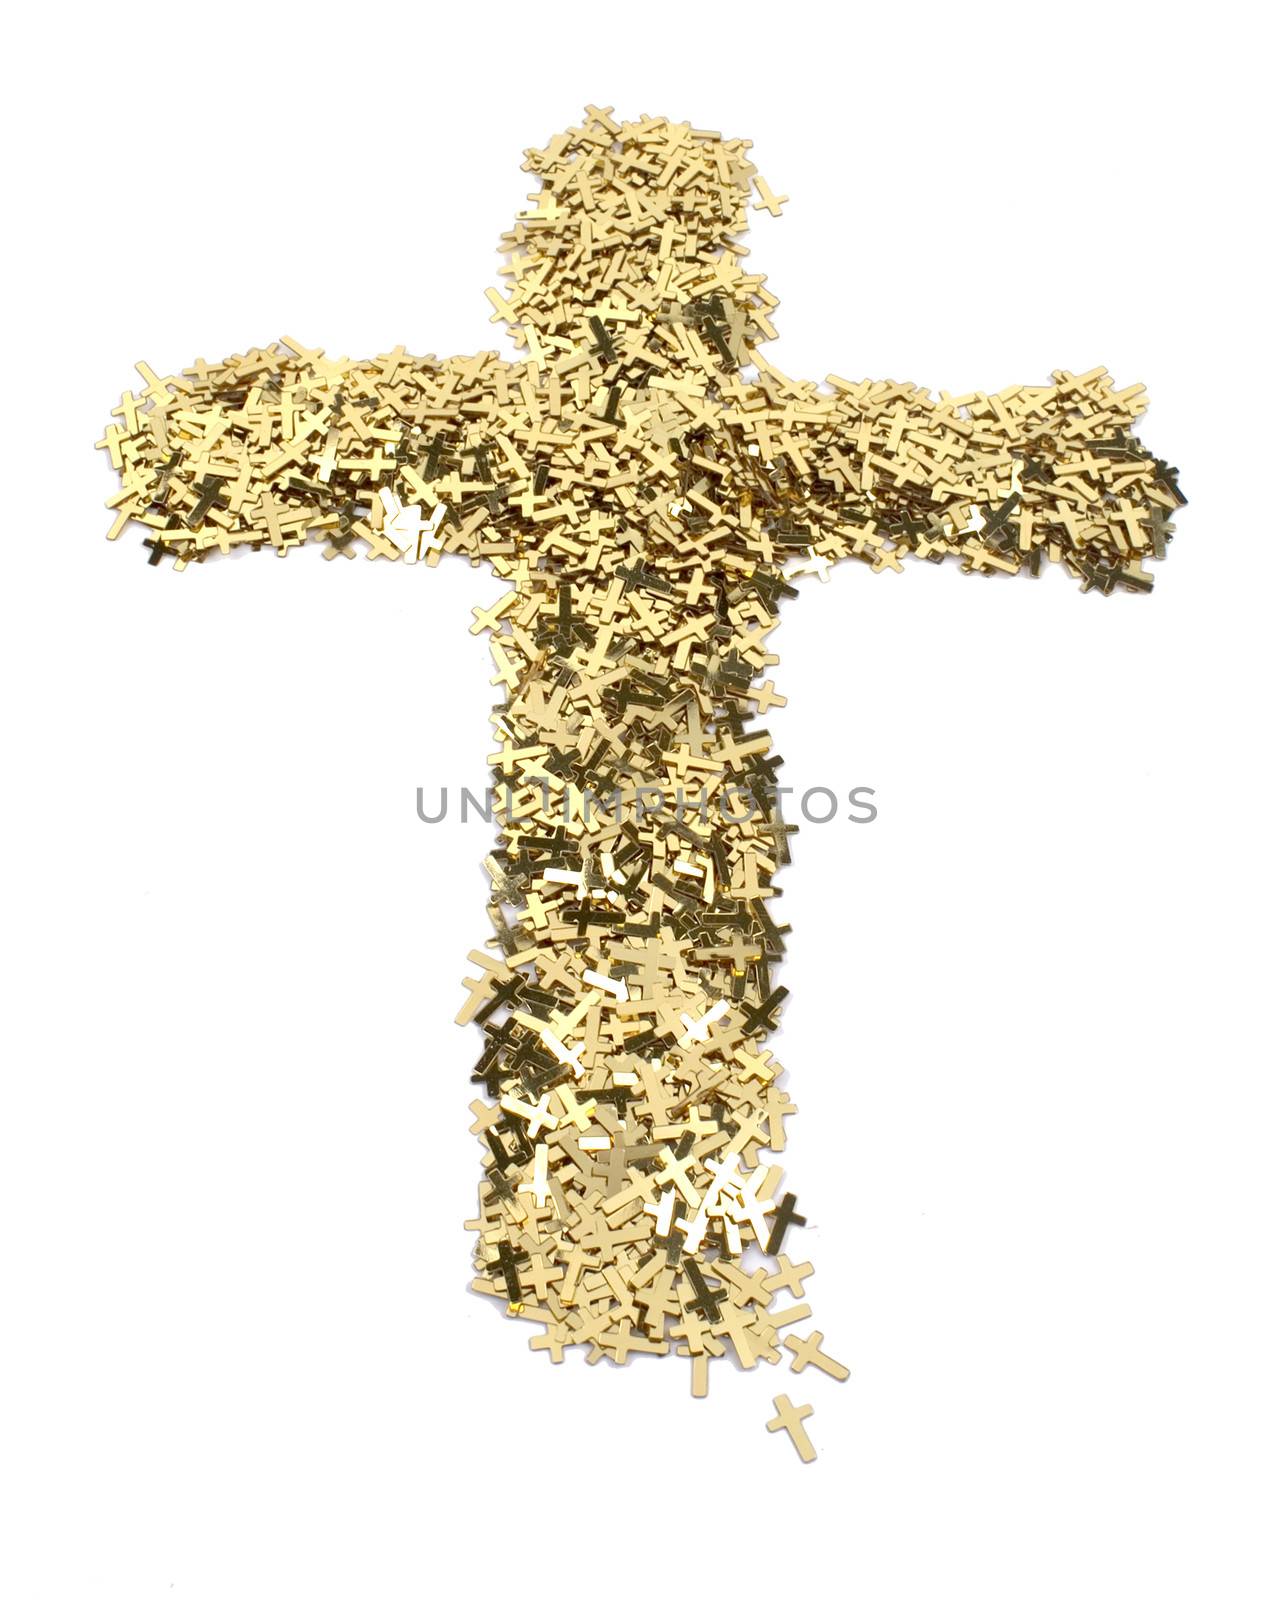 A cross made small gold crosses against a white background.